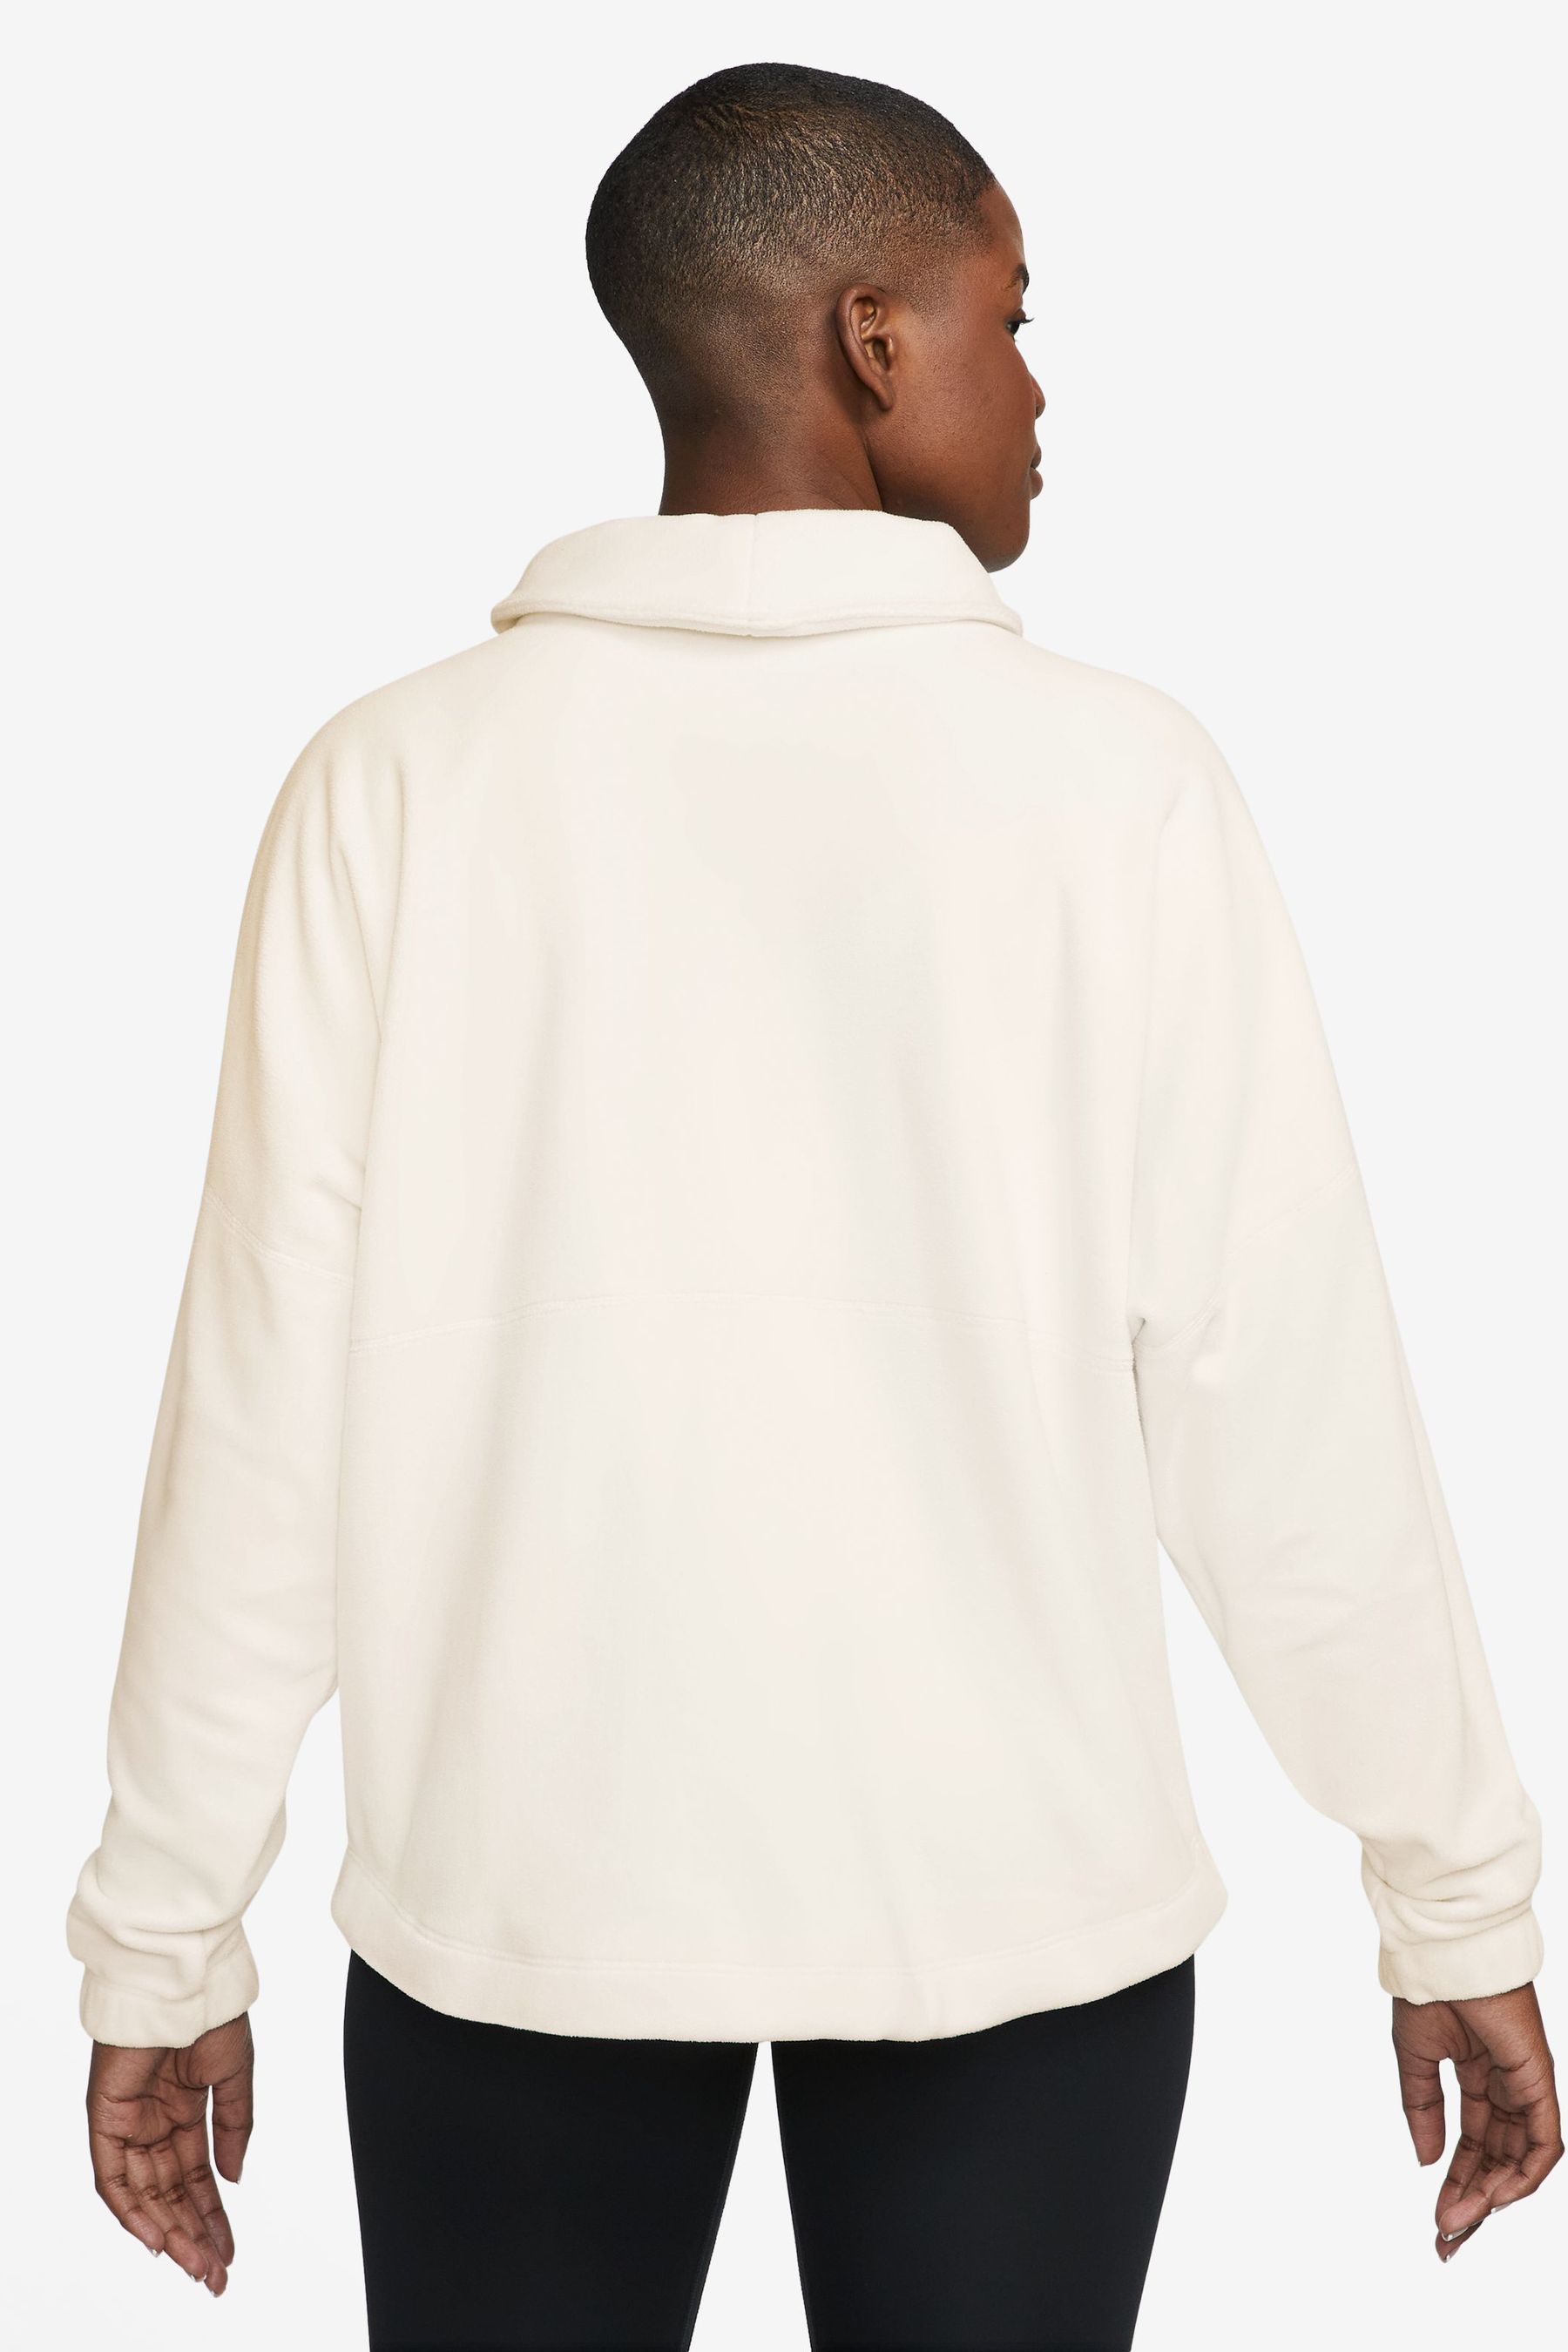 Buy Nike Neutral Therma-FIT One Cosy Sweat Top from the Next UK online shop